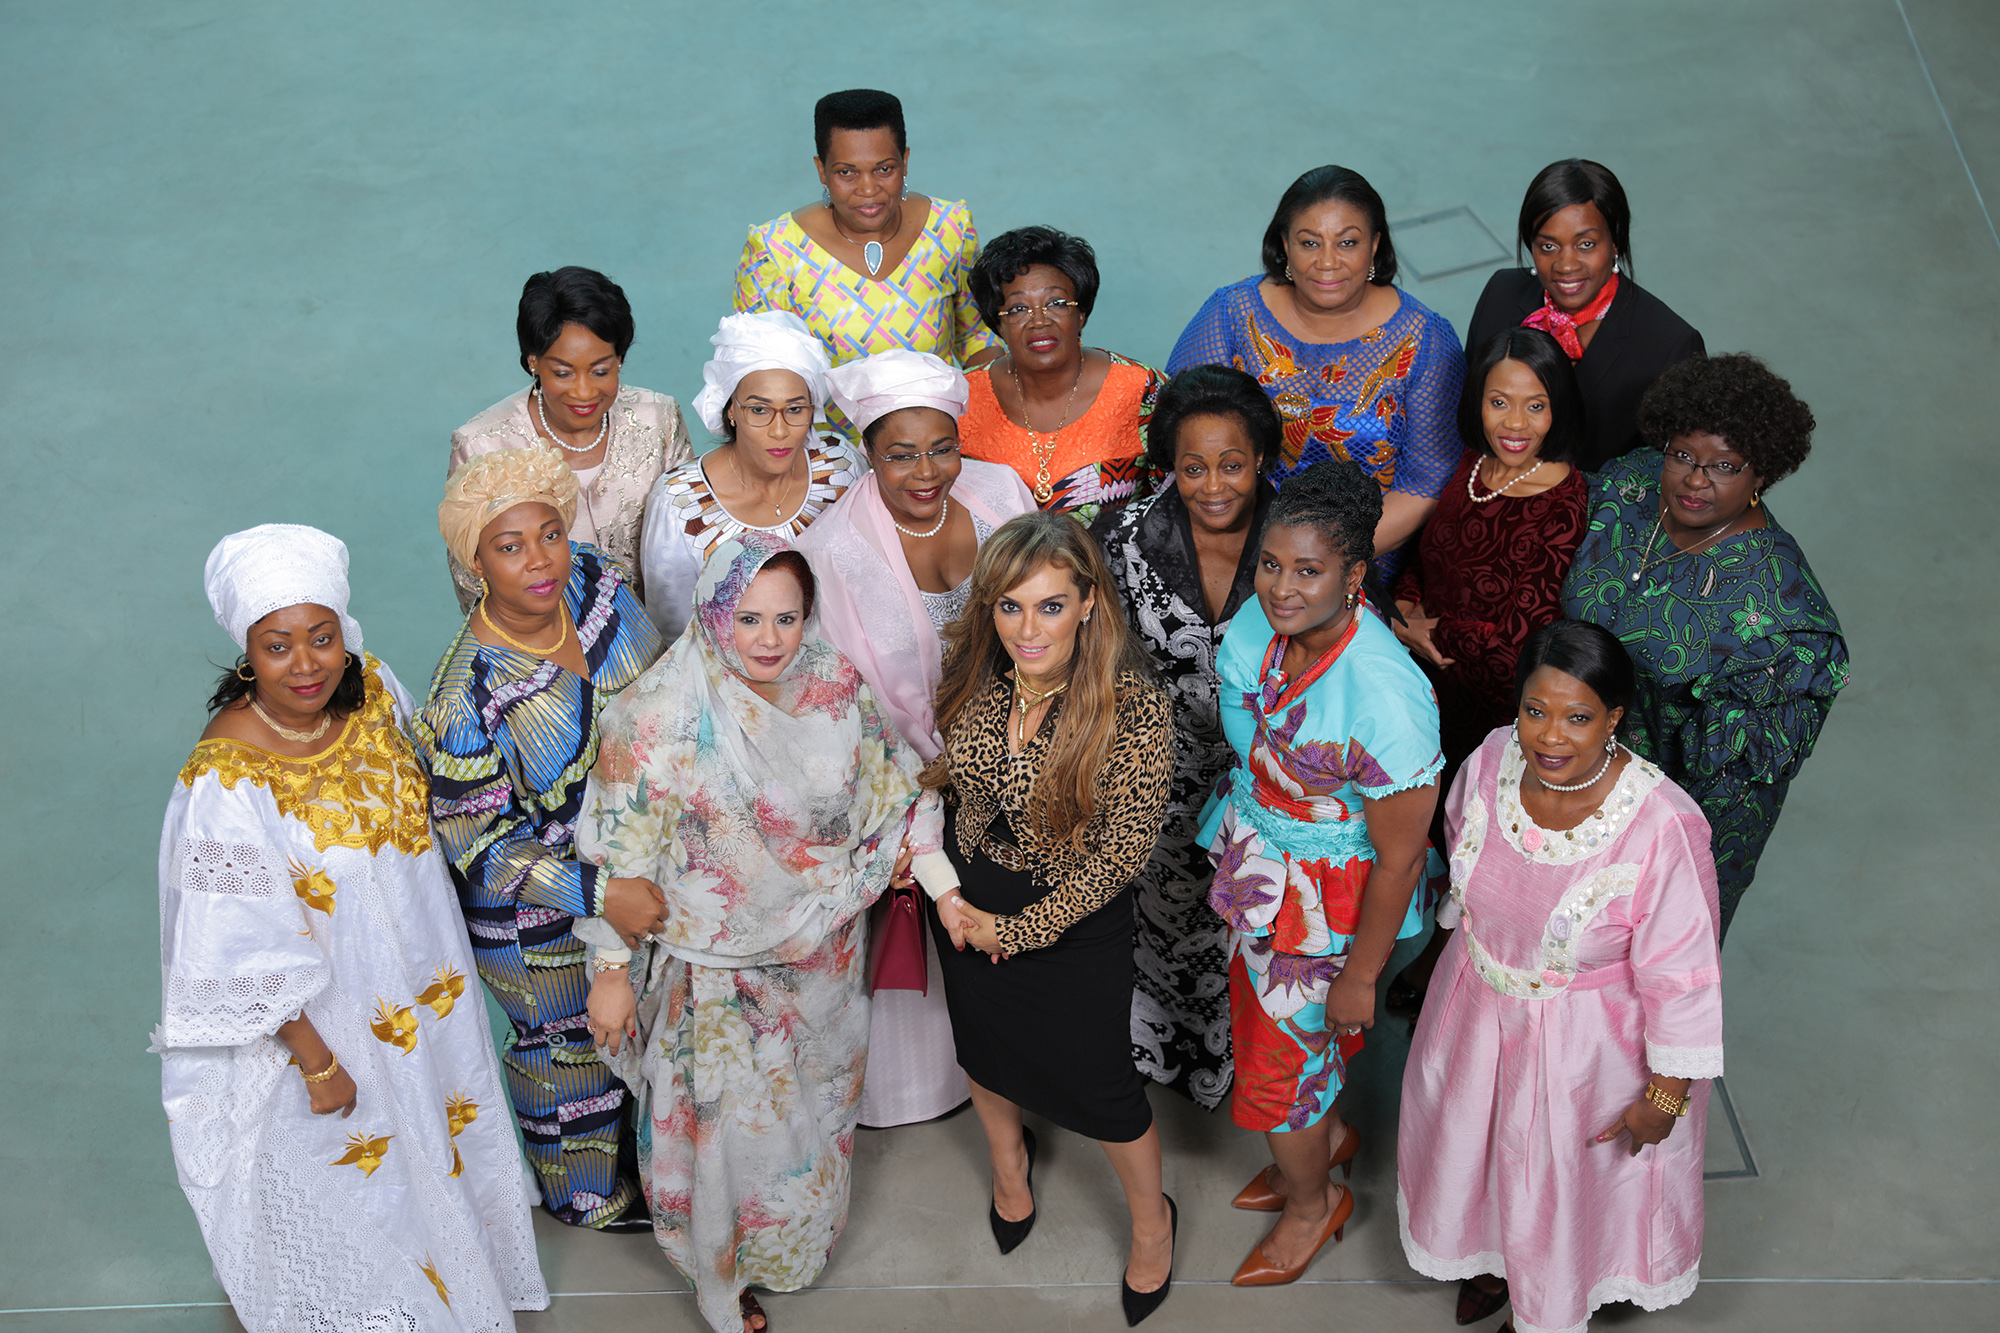 Dr. Rasha Kelej, CEO of Merck Foundation with H.E. First Ladies of Burundi, Guinea Conakry, Sierra Leone, Gambia, Niger, Malawi, Mozambique, Zimbabwe, Central African Republic, Congo Brazzaville, Ghana, Namibia, Botswana, Liberia and Former First Lady of Mauritania.